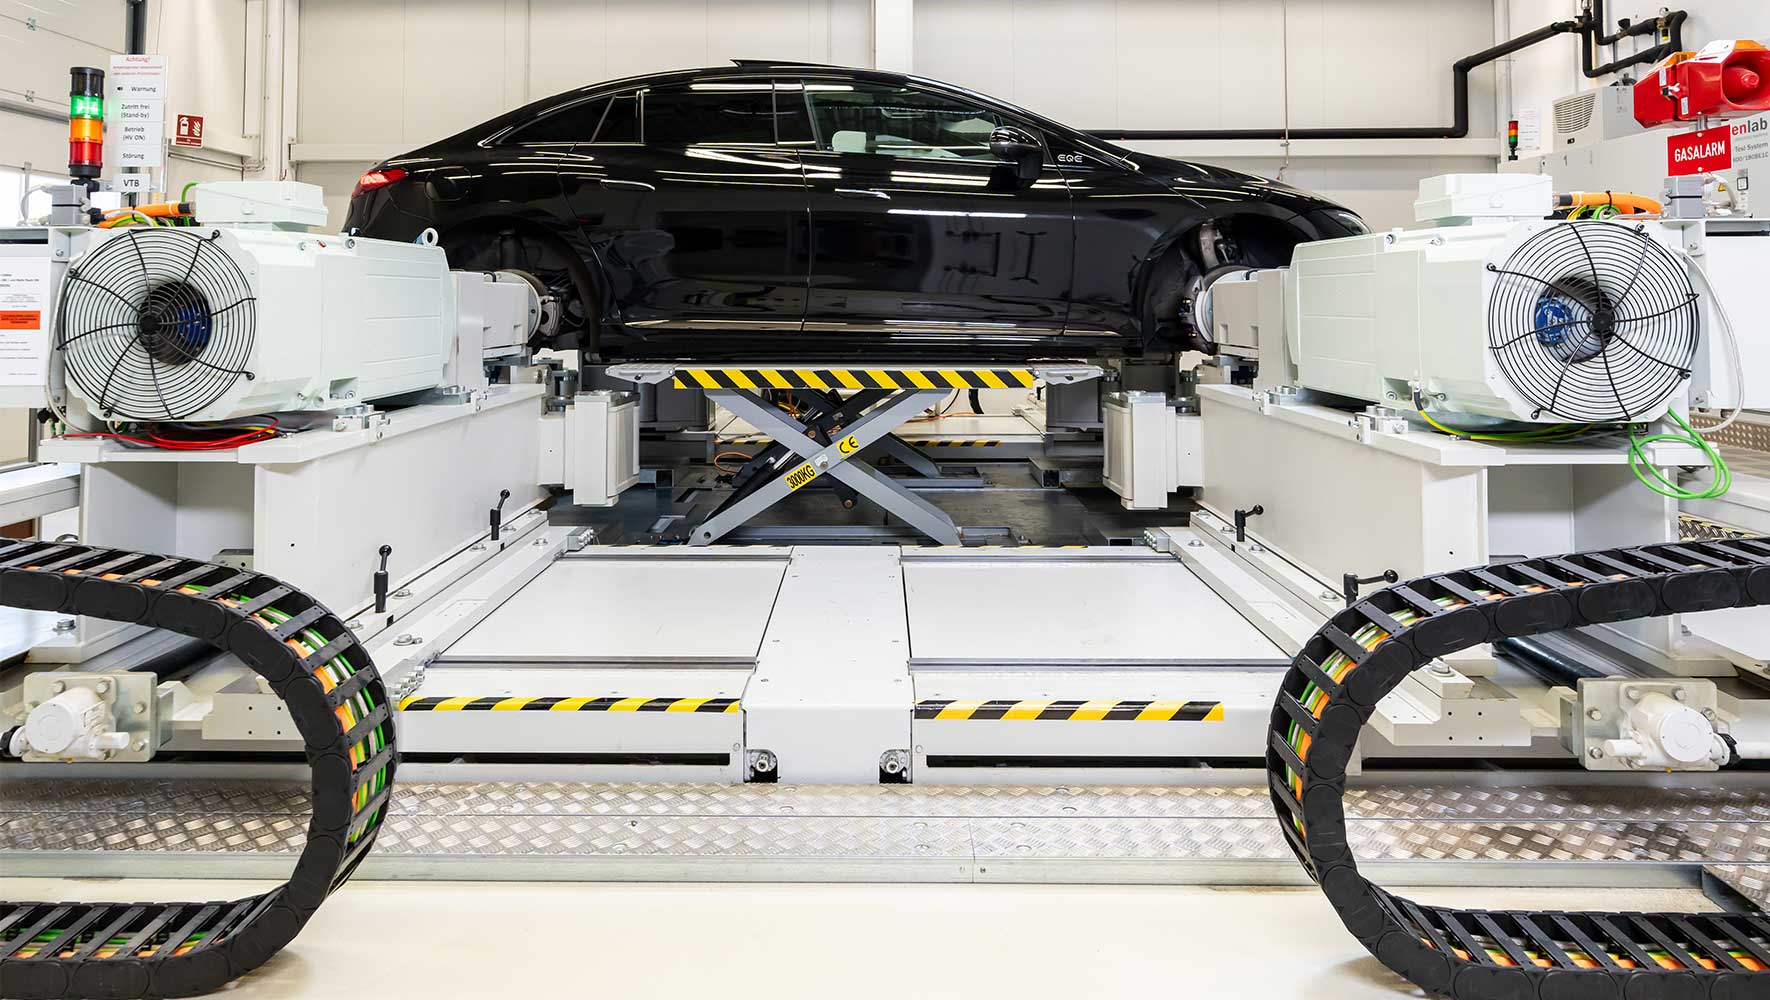 Erlangen has a wide range of testing and validation facilities, including those for complete vehicles